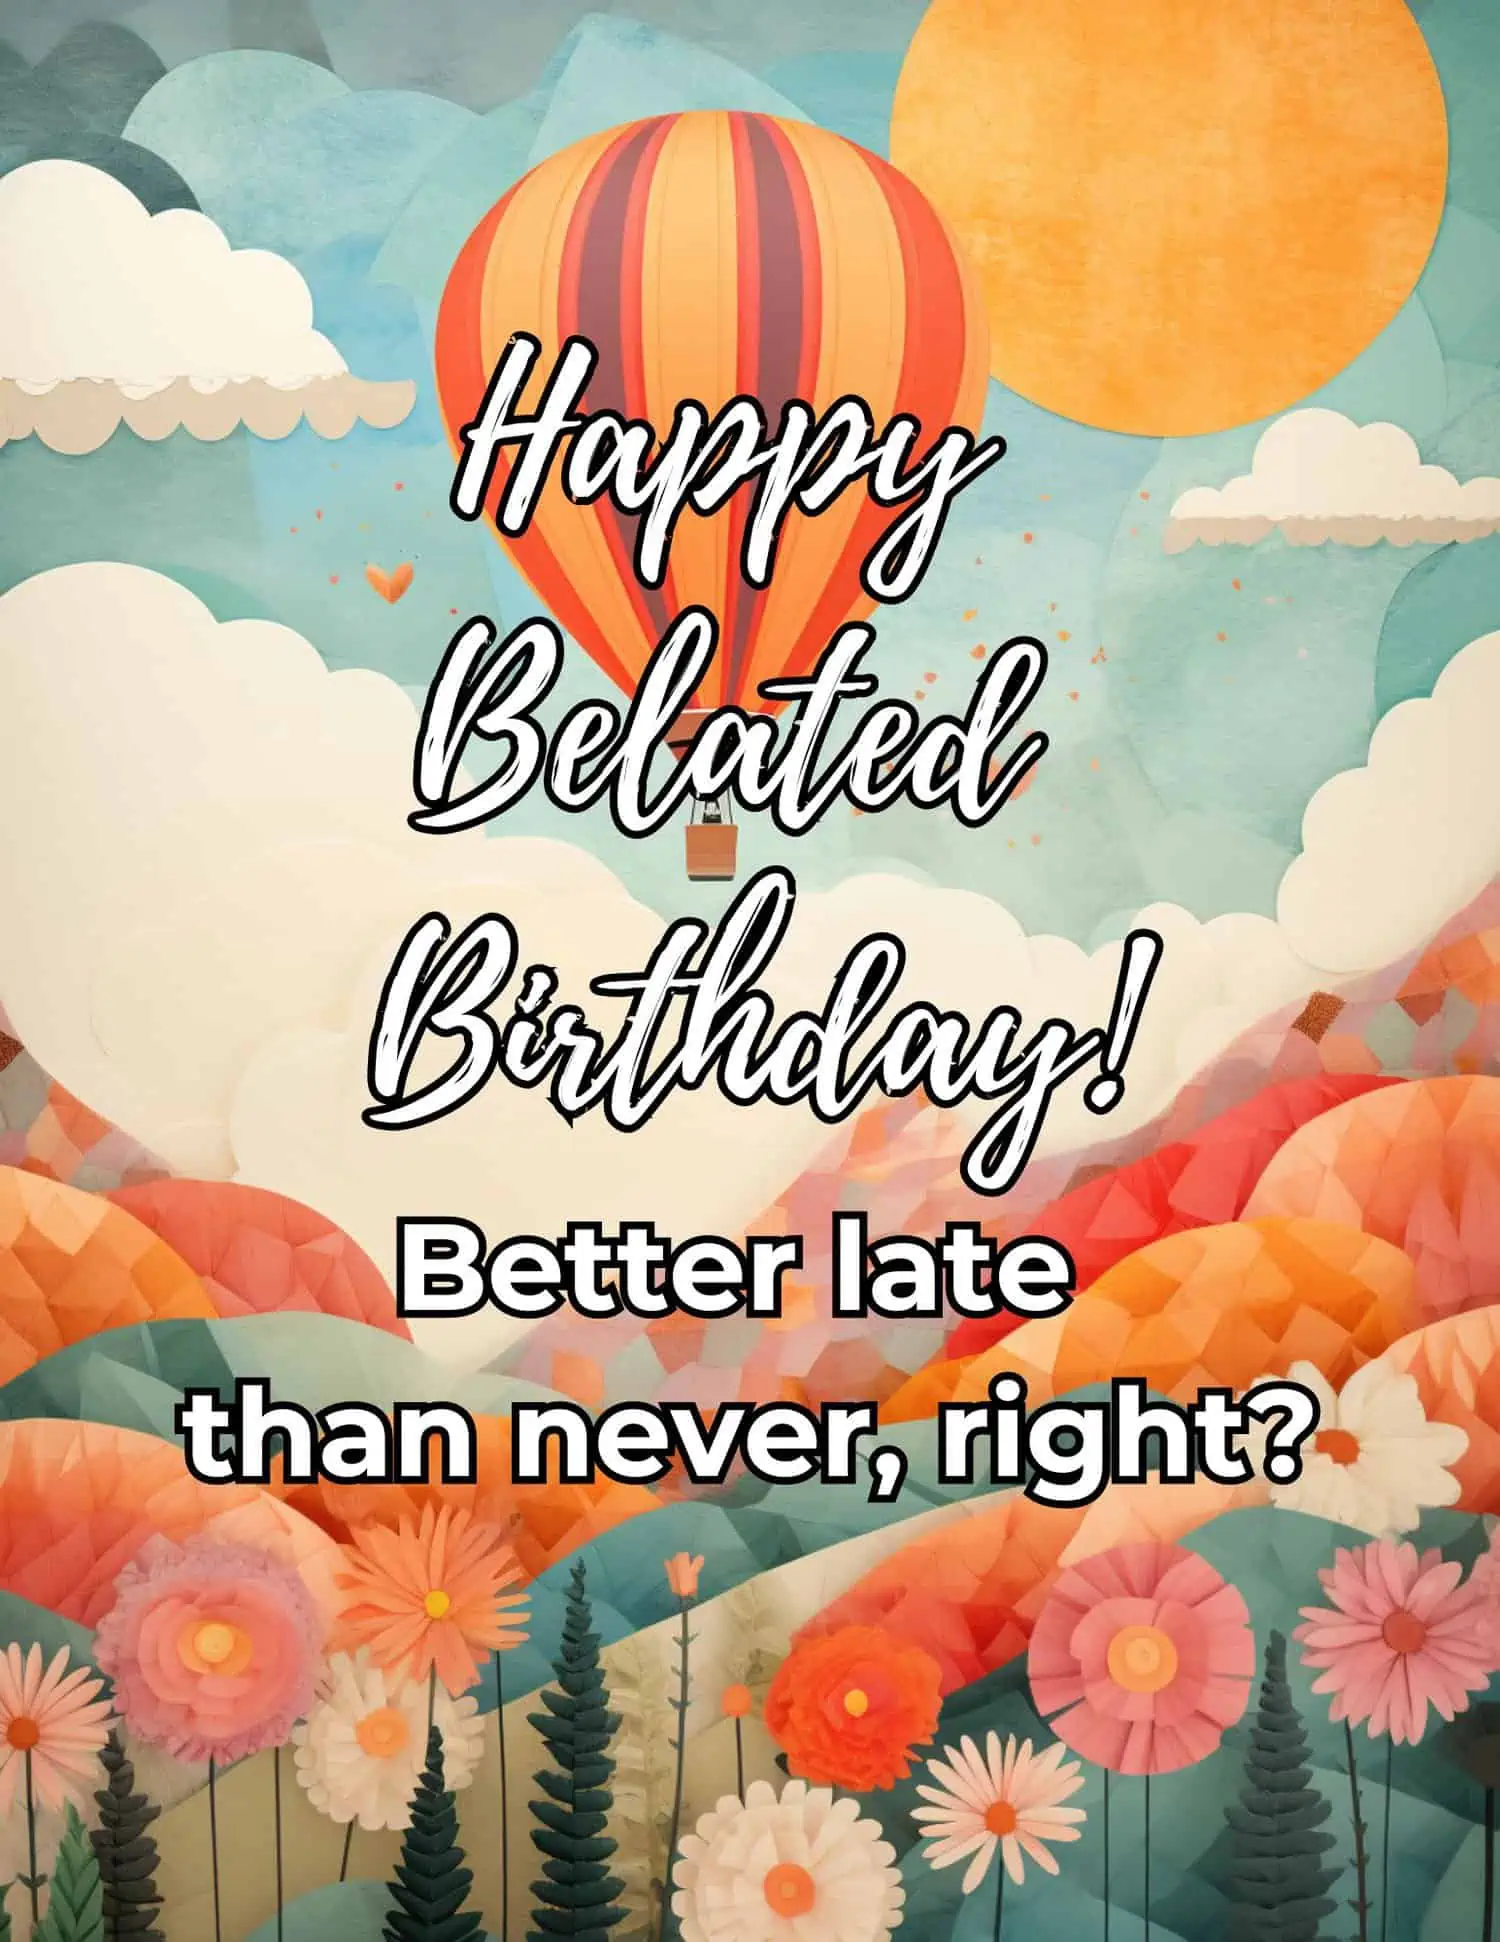 A collection of warm and sometimes humorous belated birthday wishes for an ex-boyfriend, each accompanied by a personal insight on the sentiment and meaning behind the message.